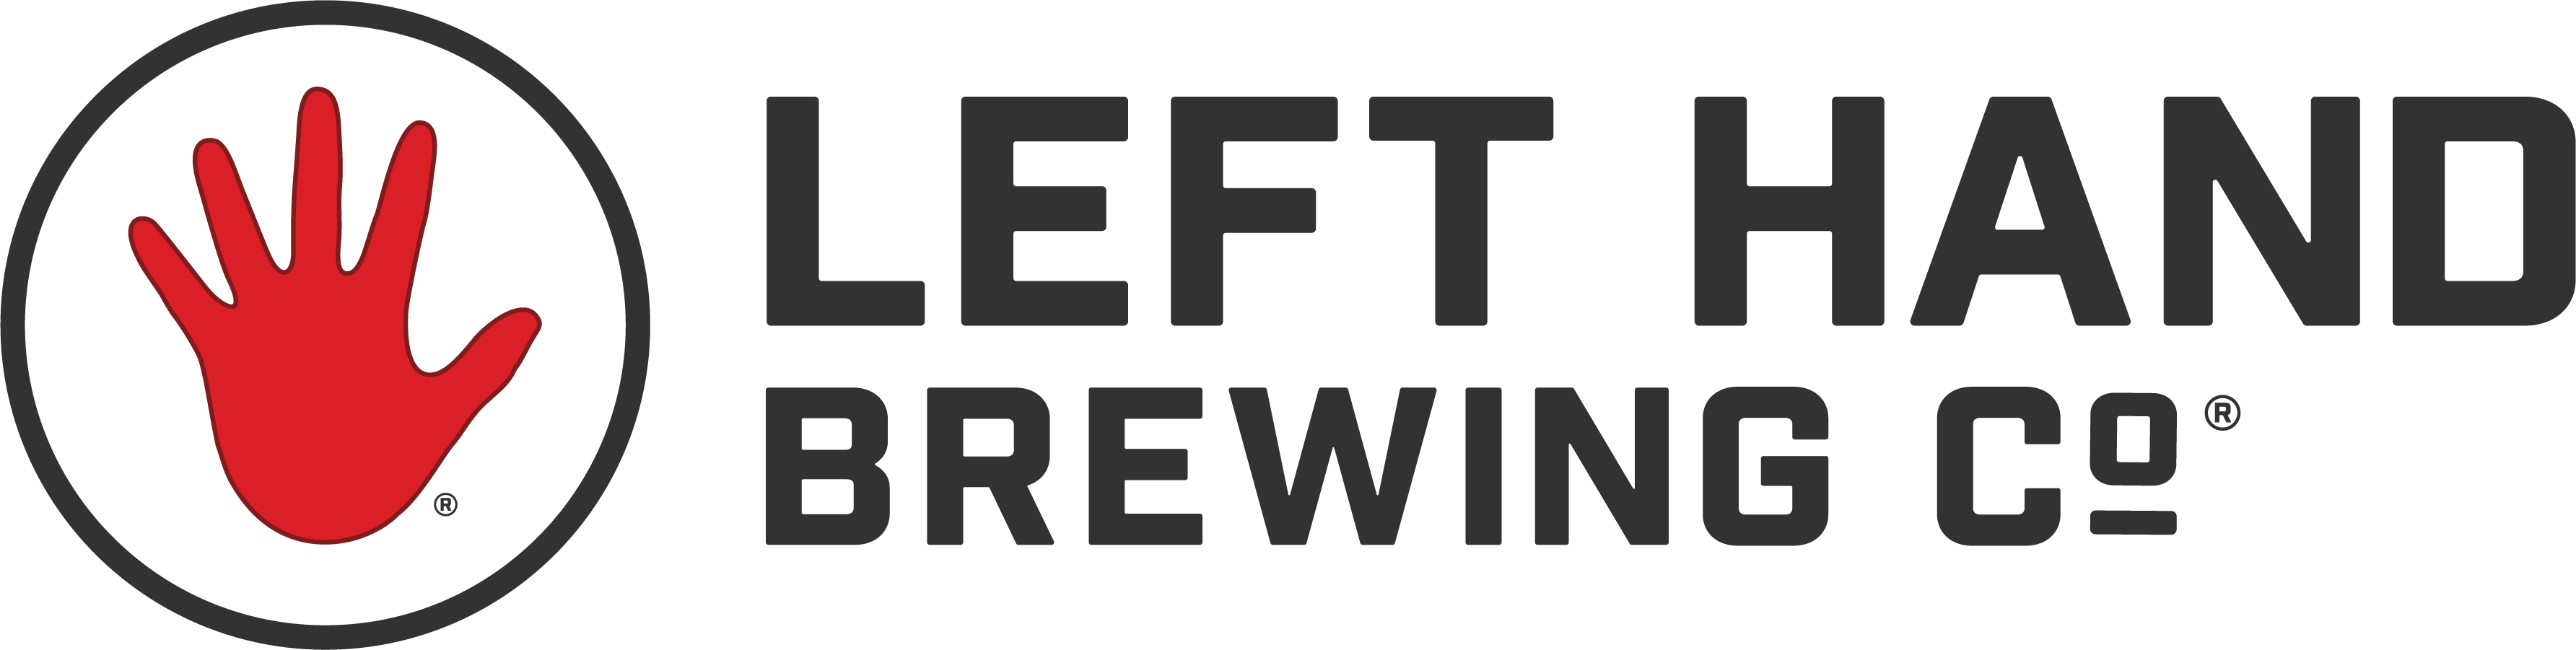 left_hand_brewing_logo.png